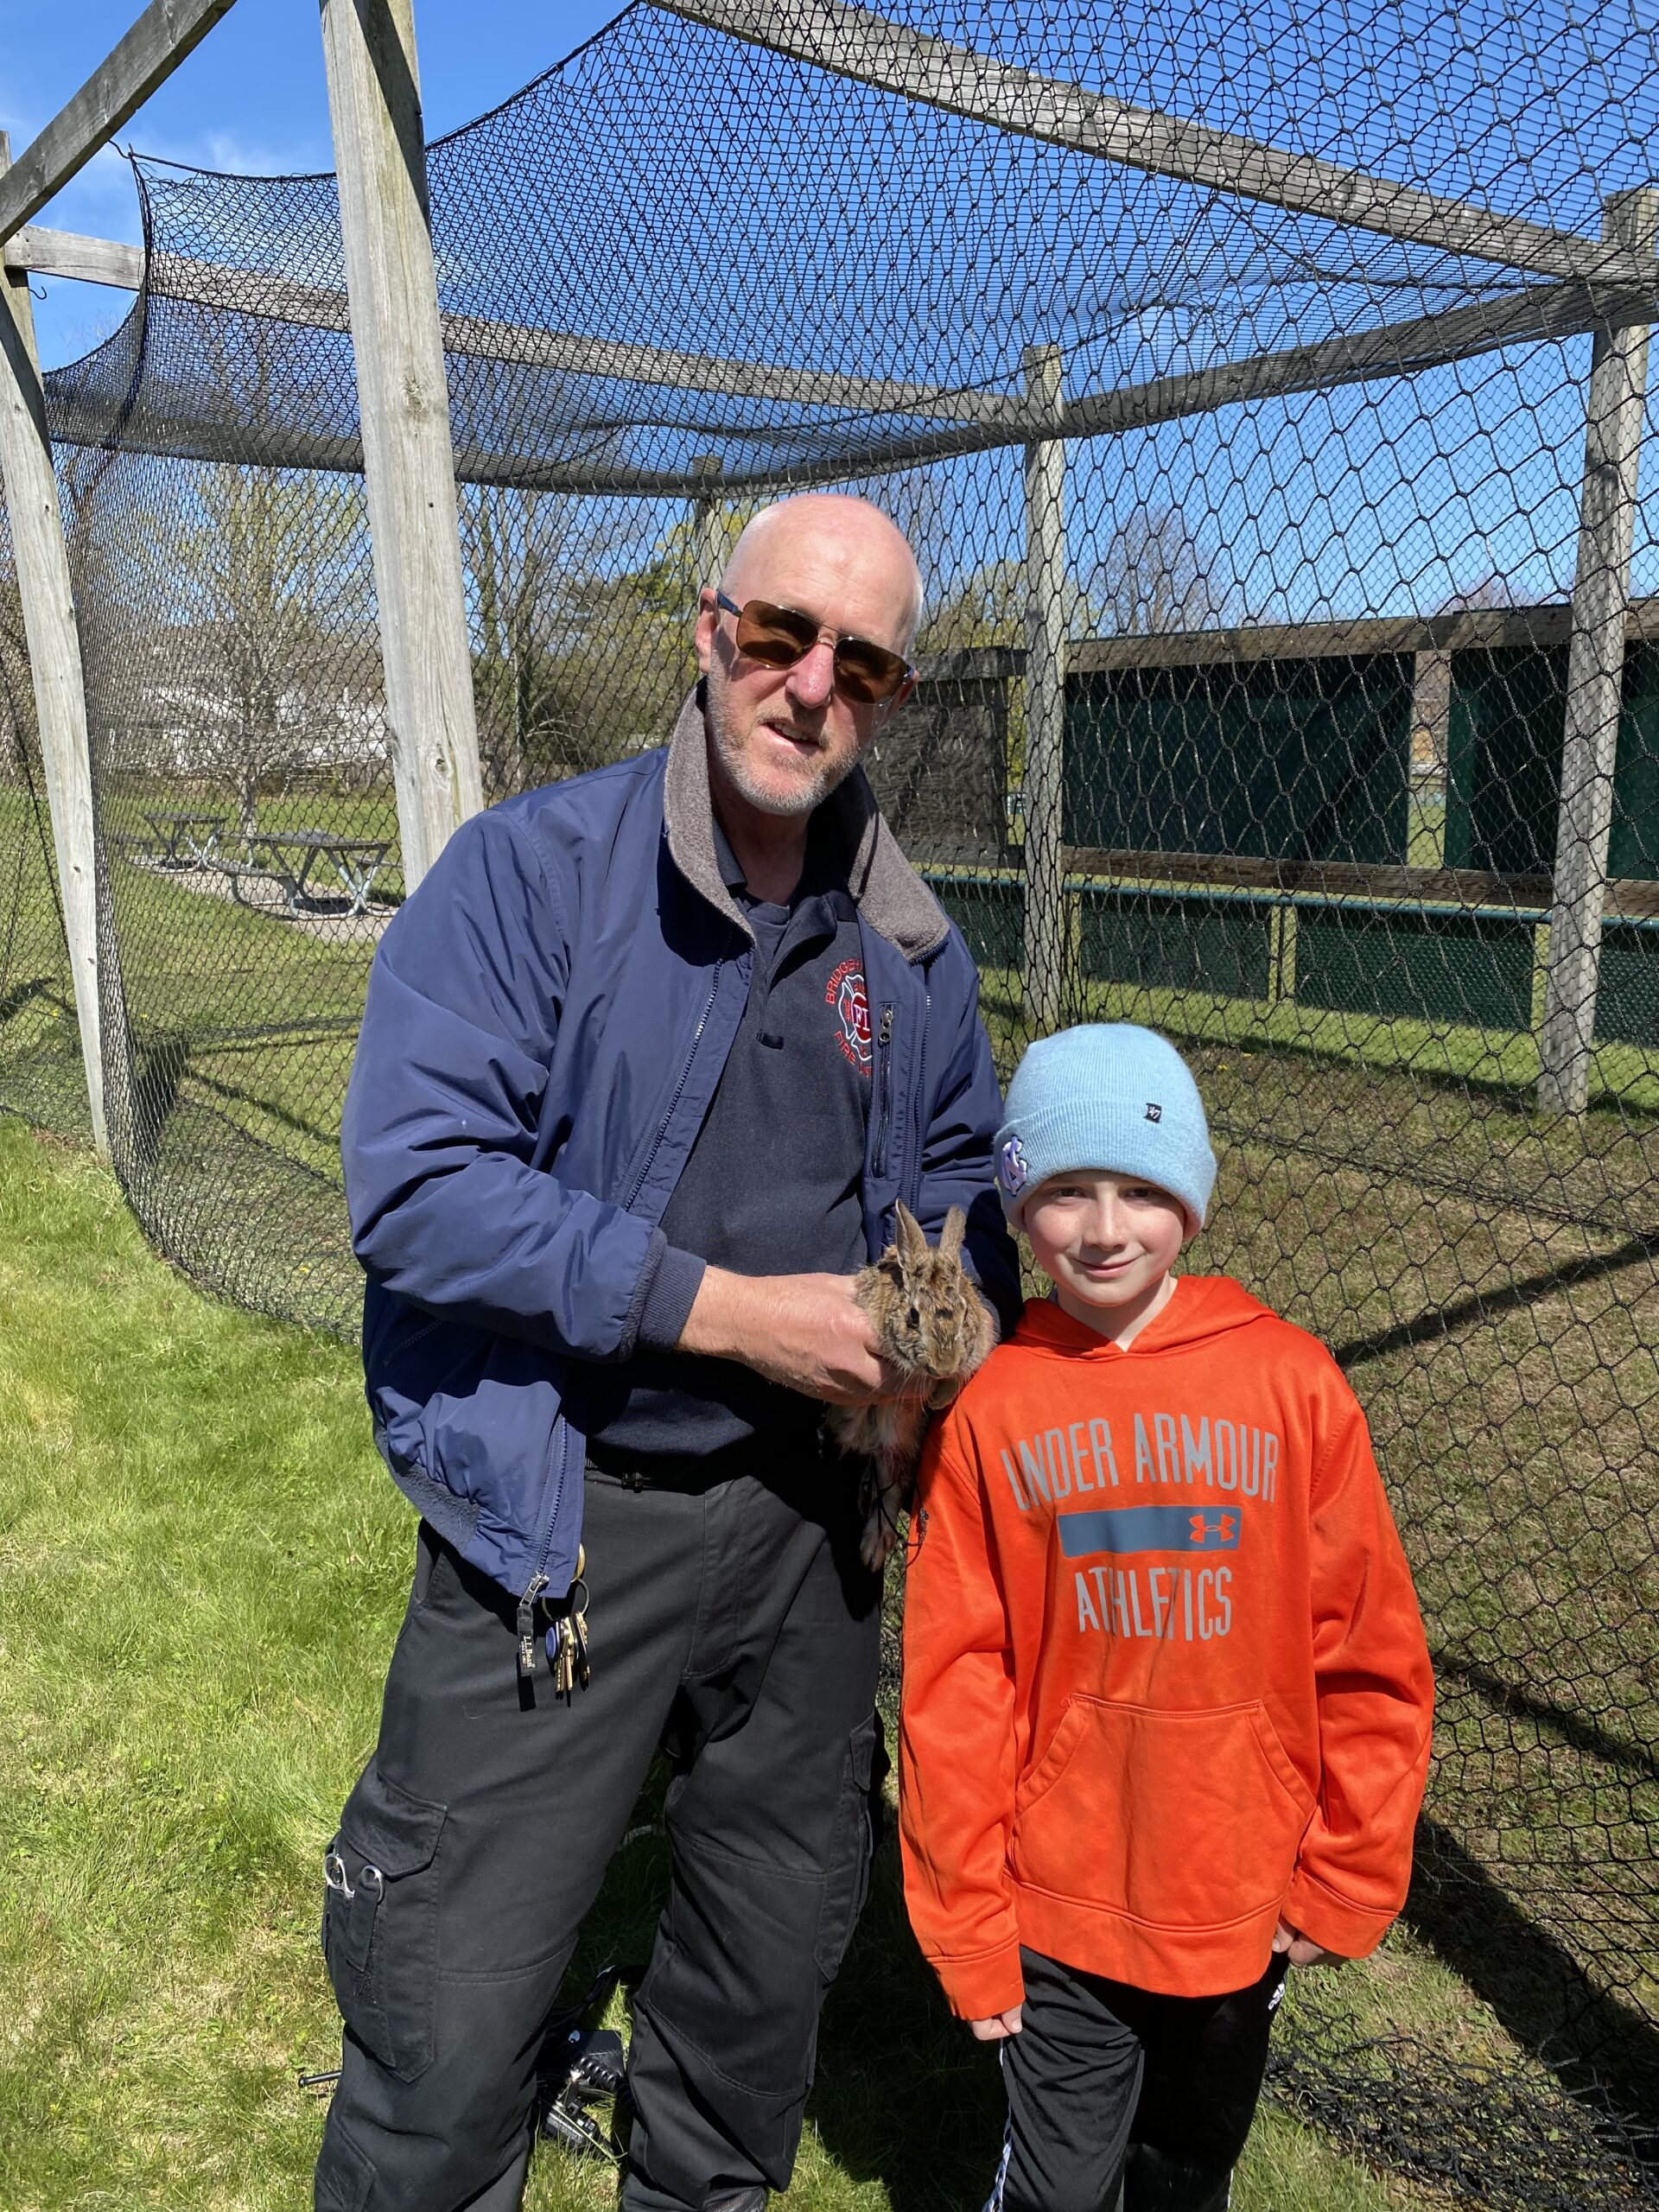 Brian Doyle with his son Brendan, a fourth-grader at Tuckahoe School who, while on his way to batting practice recently found a bunny tangled in the batting cage netting.  He ran to the Bridgehampton Fire Station and found Paul Rittenhouse, a paramedic, who assisted him in removing the exhausted bunny from the netting and returning it to his mother. COURTESY BRIAN DOYLE